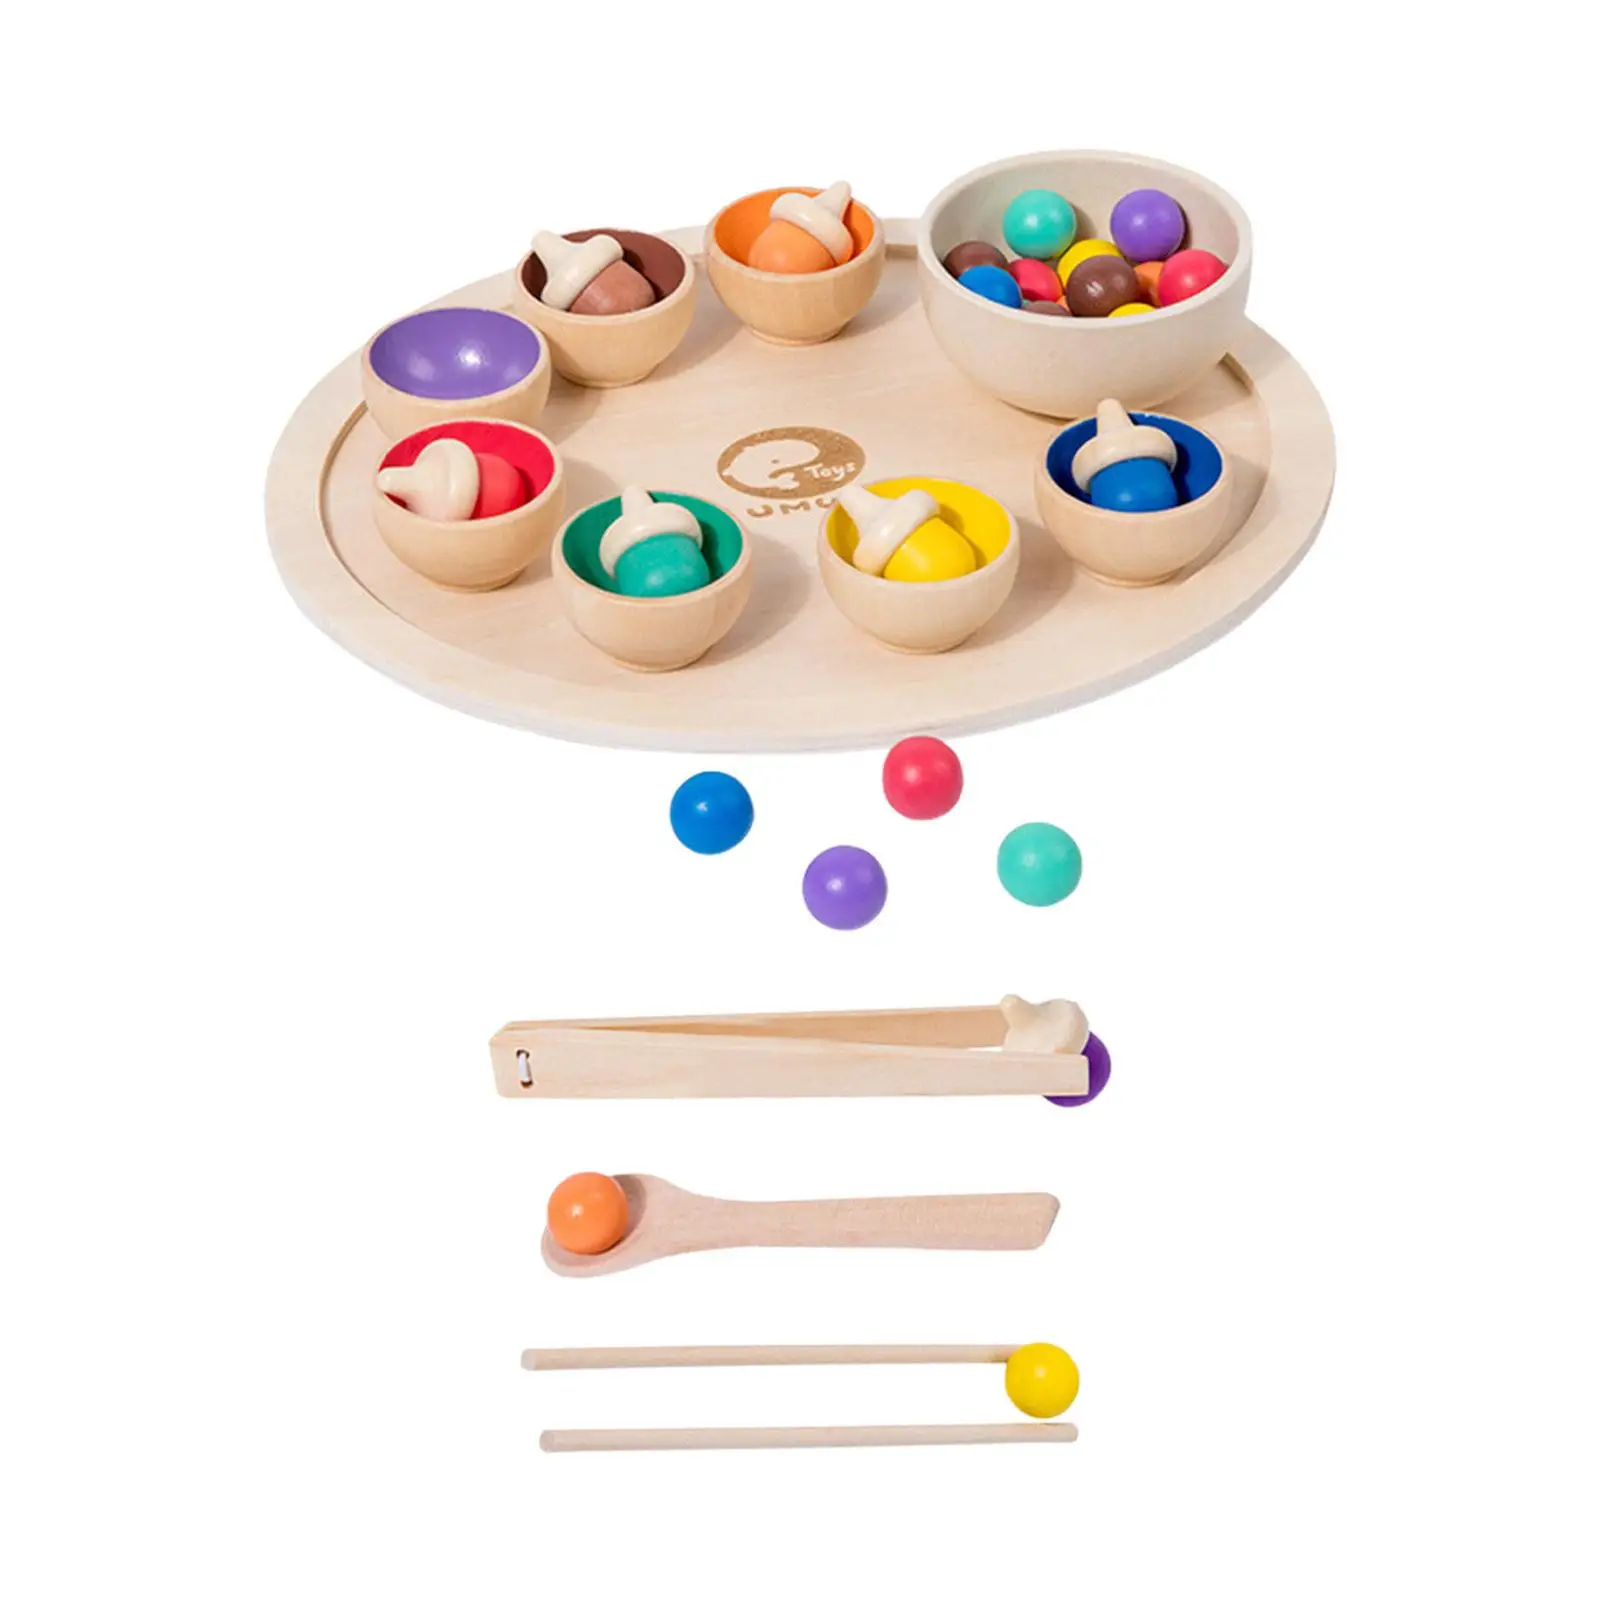 Wooden Rainbow Toys Color Sorting and Counting Fine Motor Montessori Bowls Toy Balls Matching for 1+ Year Old Baby Kids Children